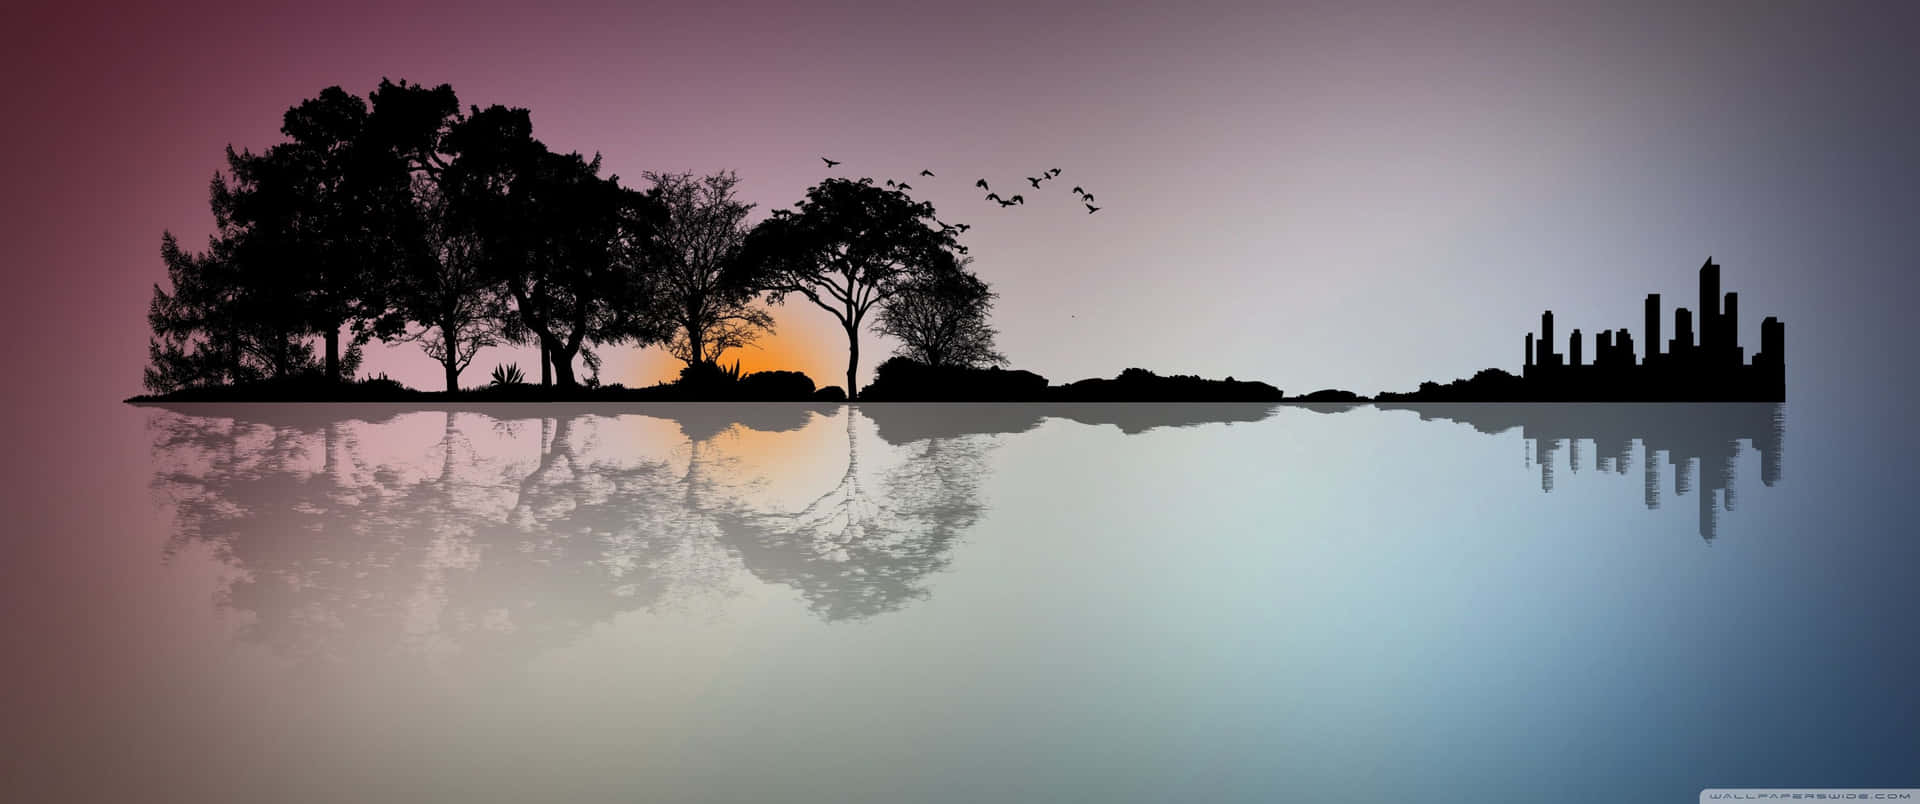 a silhouette of trees and water with reflections